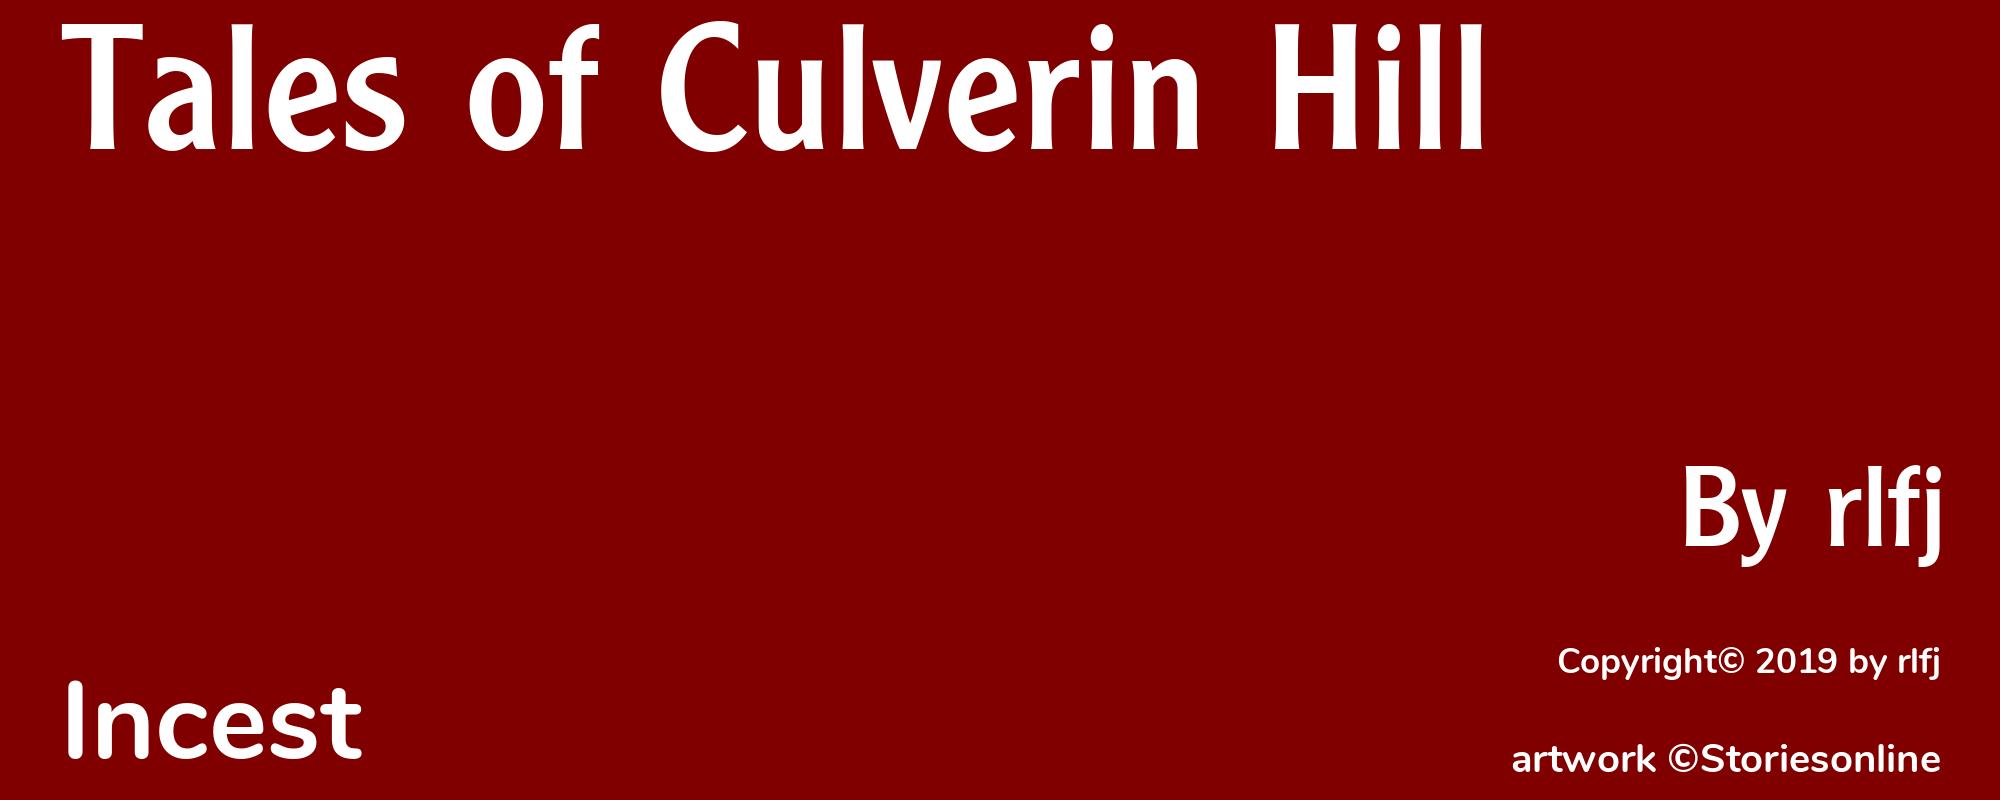 Tales of Culverin Hill - Cover